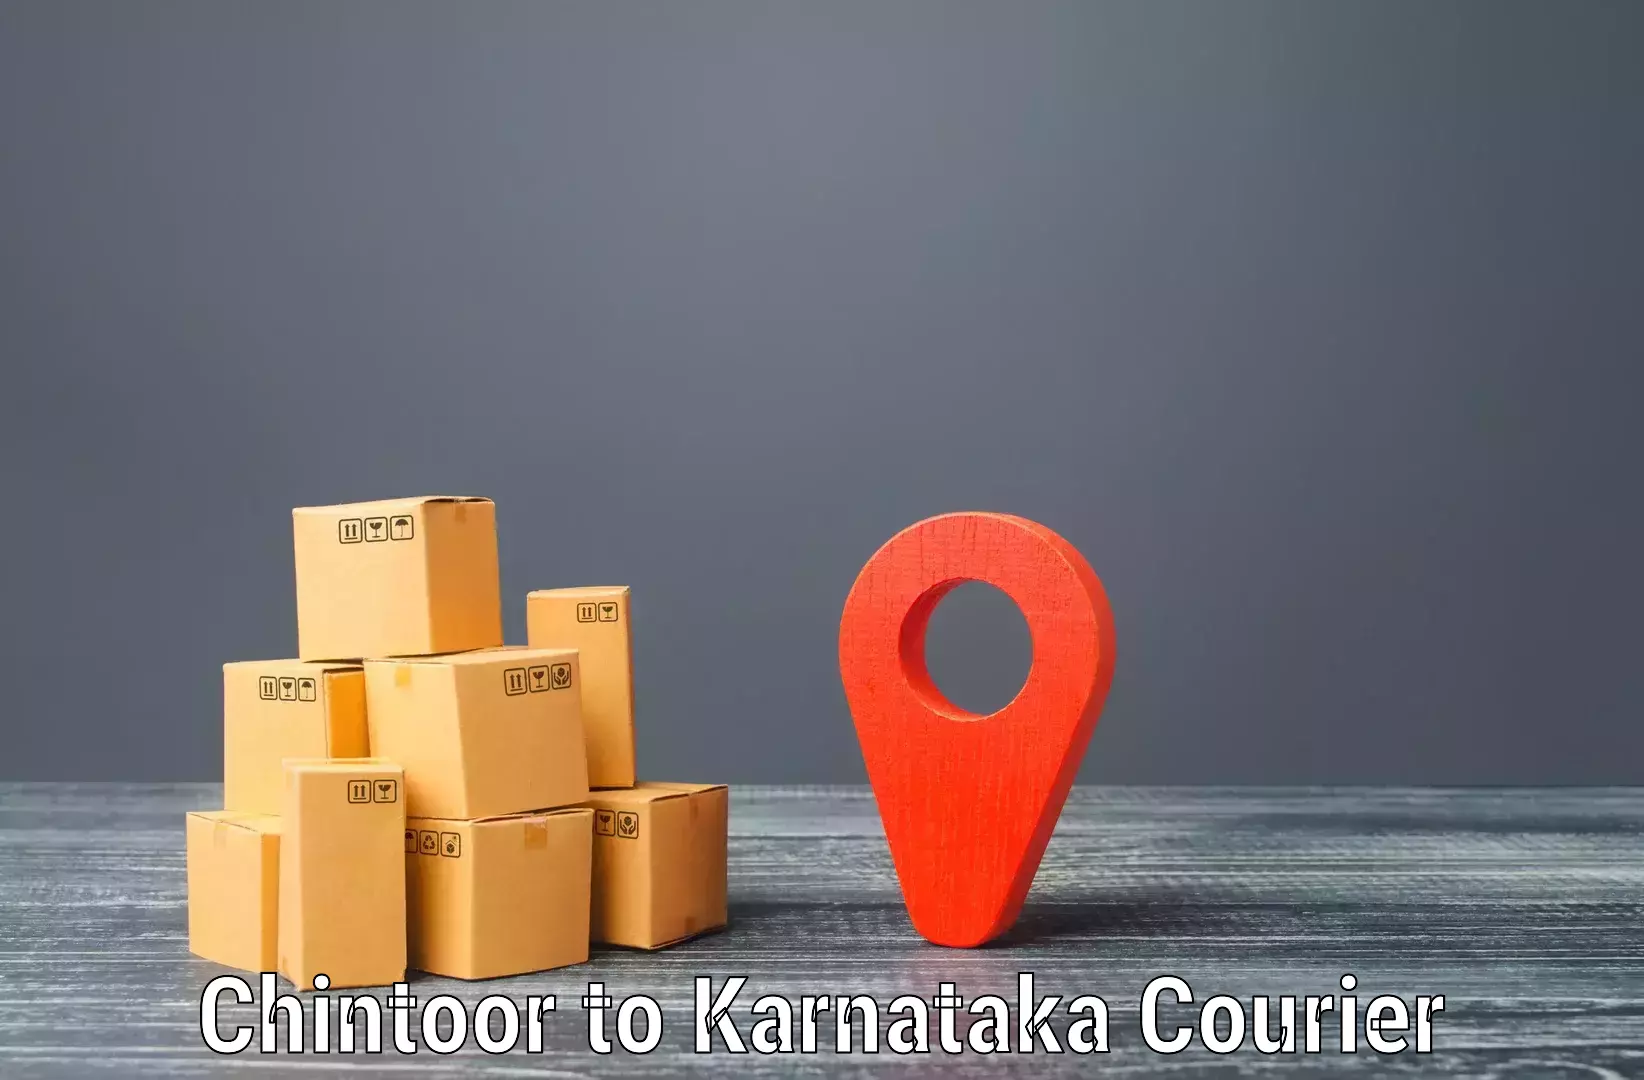 International courier networks Chintoor to Hubli